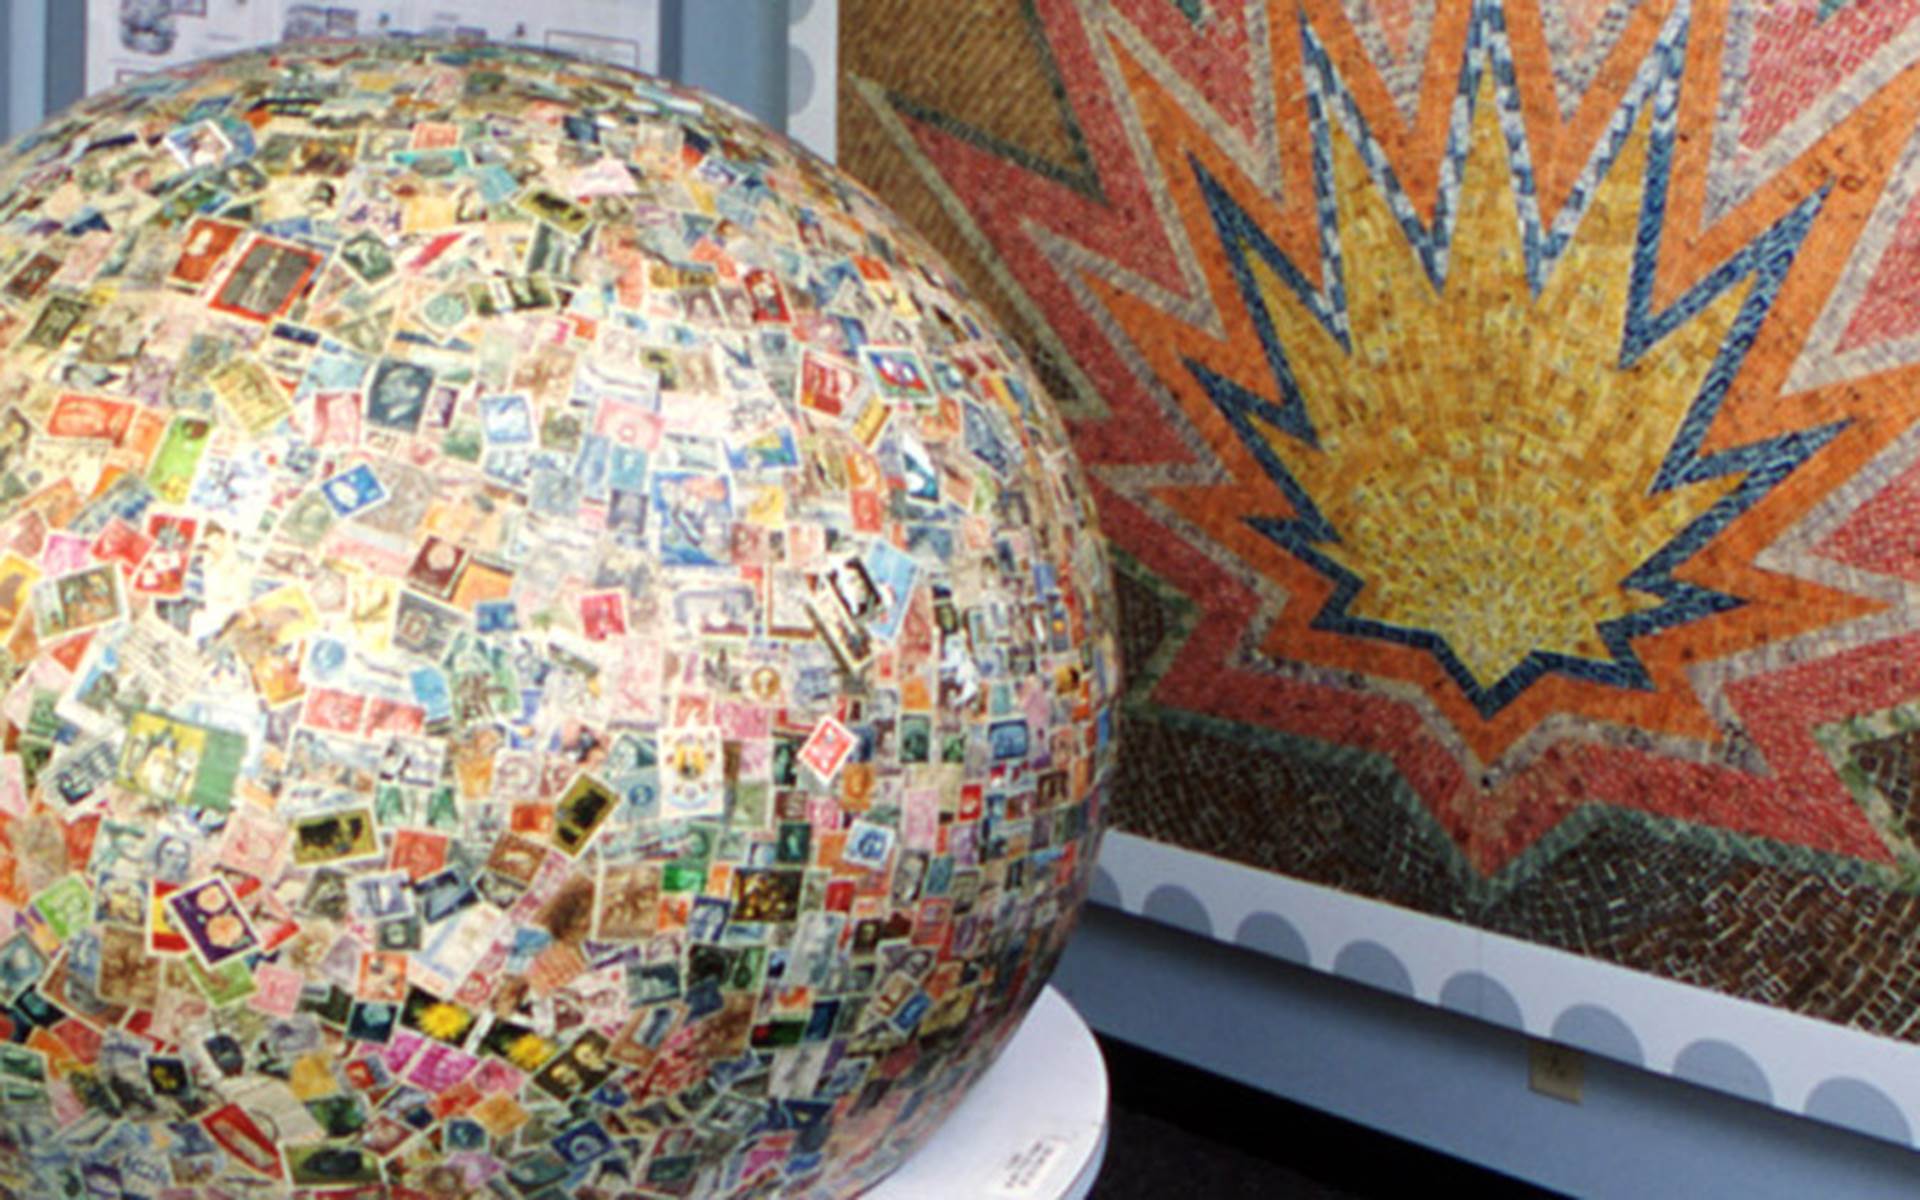 Largest Stamp Ball in the World